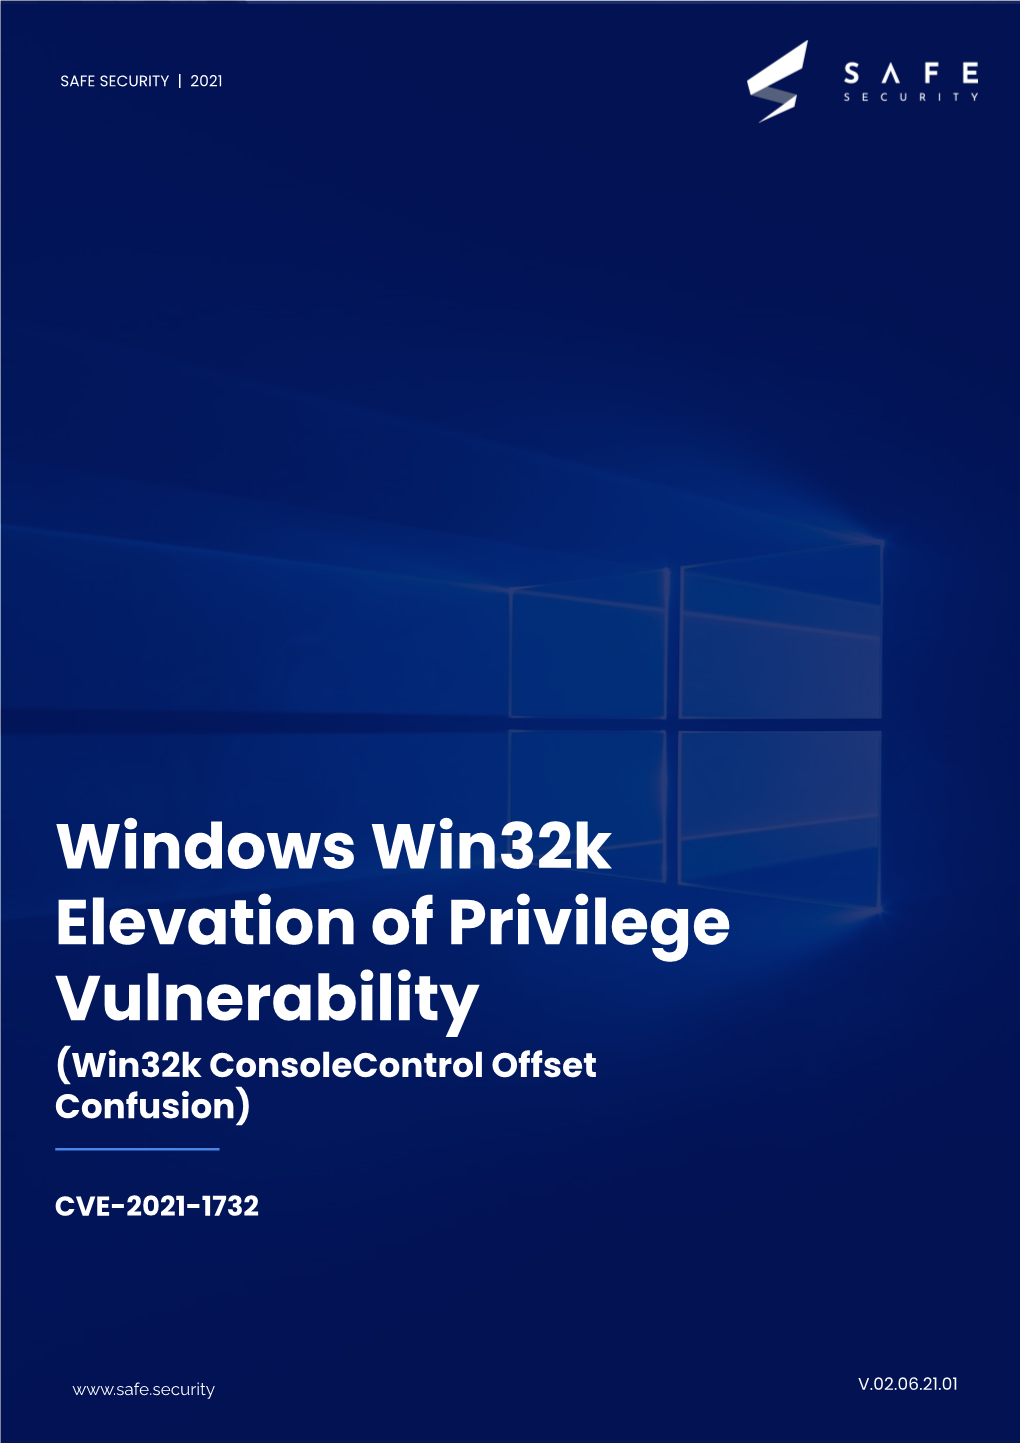 Windows Win32k Elevation of Privilege Vulnerability (Win32k Consolecontrol Offset Confusion)